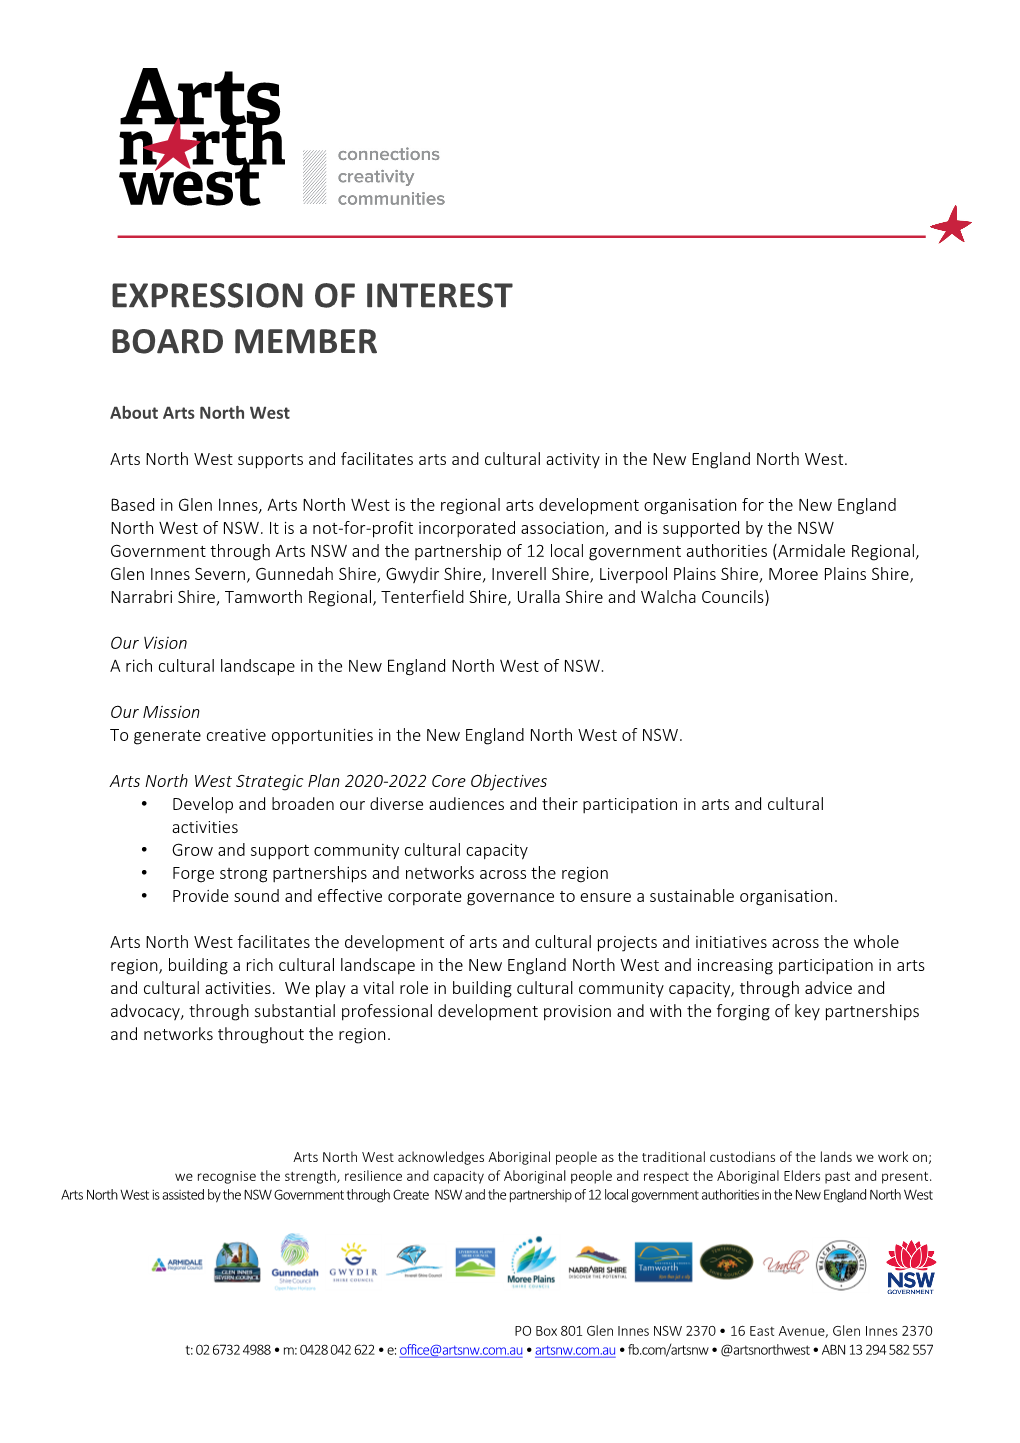 Expression of Interest Board Member